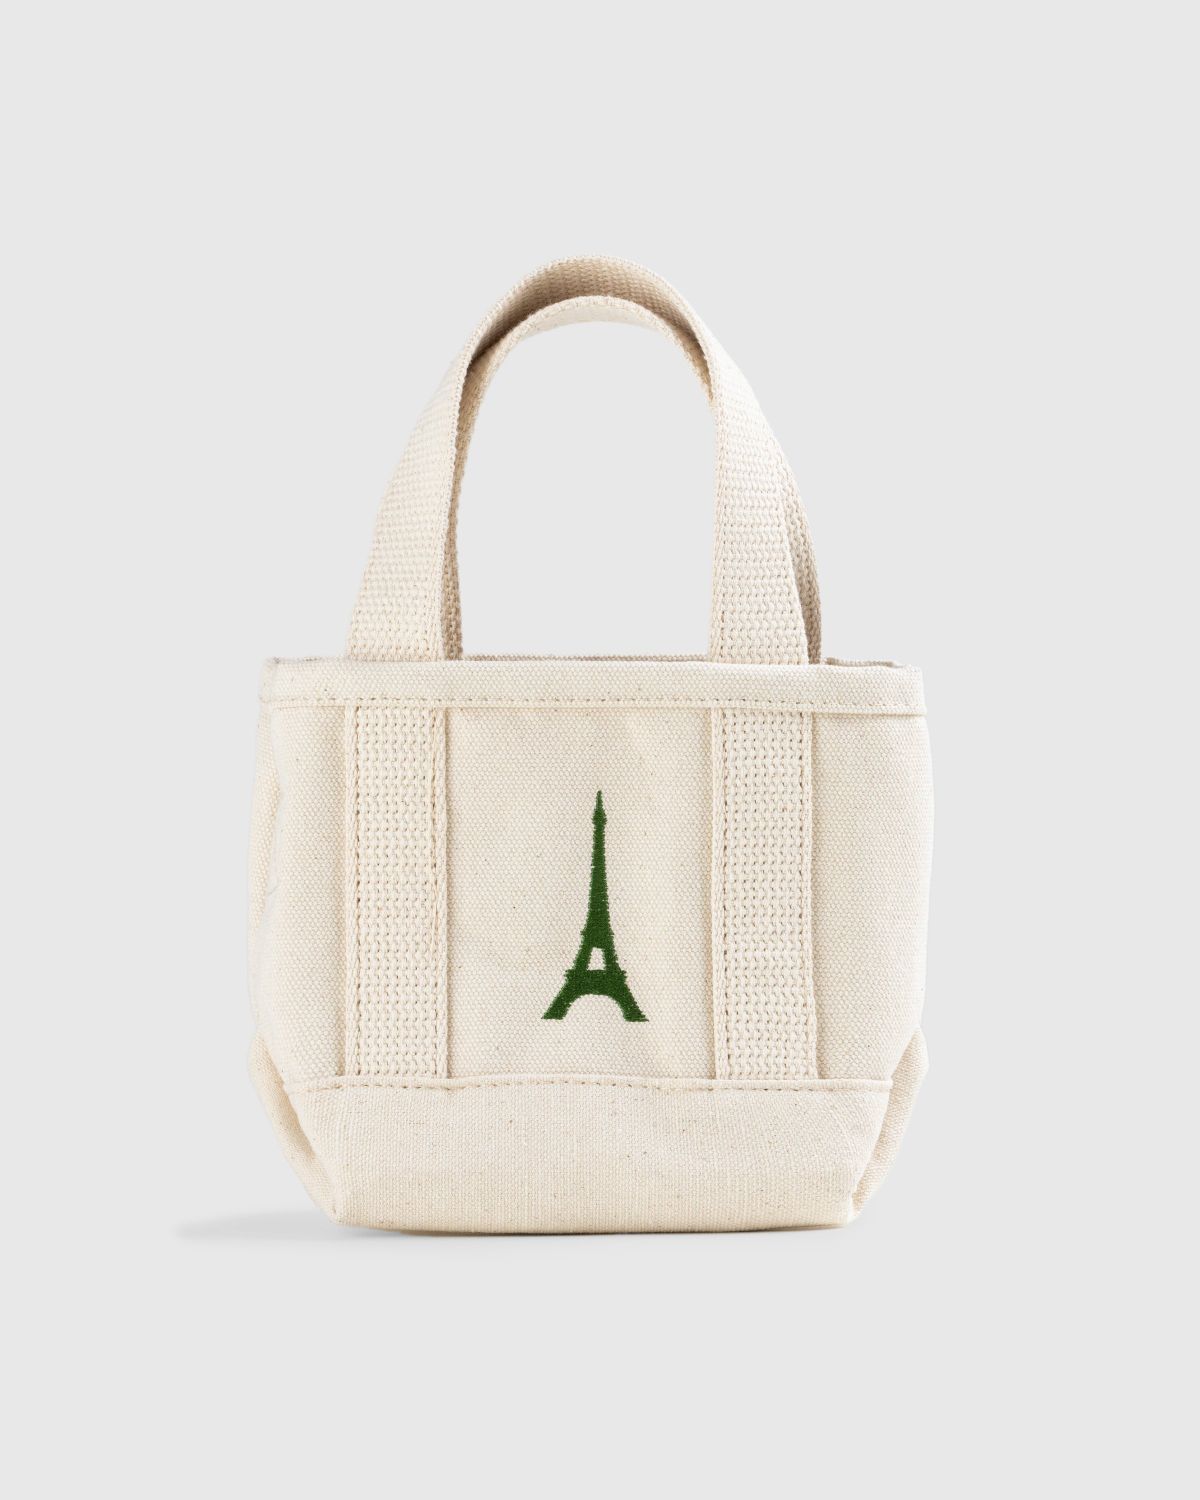 Jute Tote Bag  Mercedes-Benz Lifestyle Collection